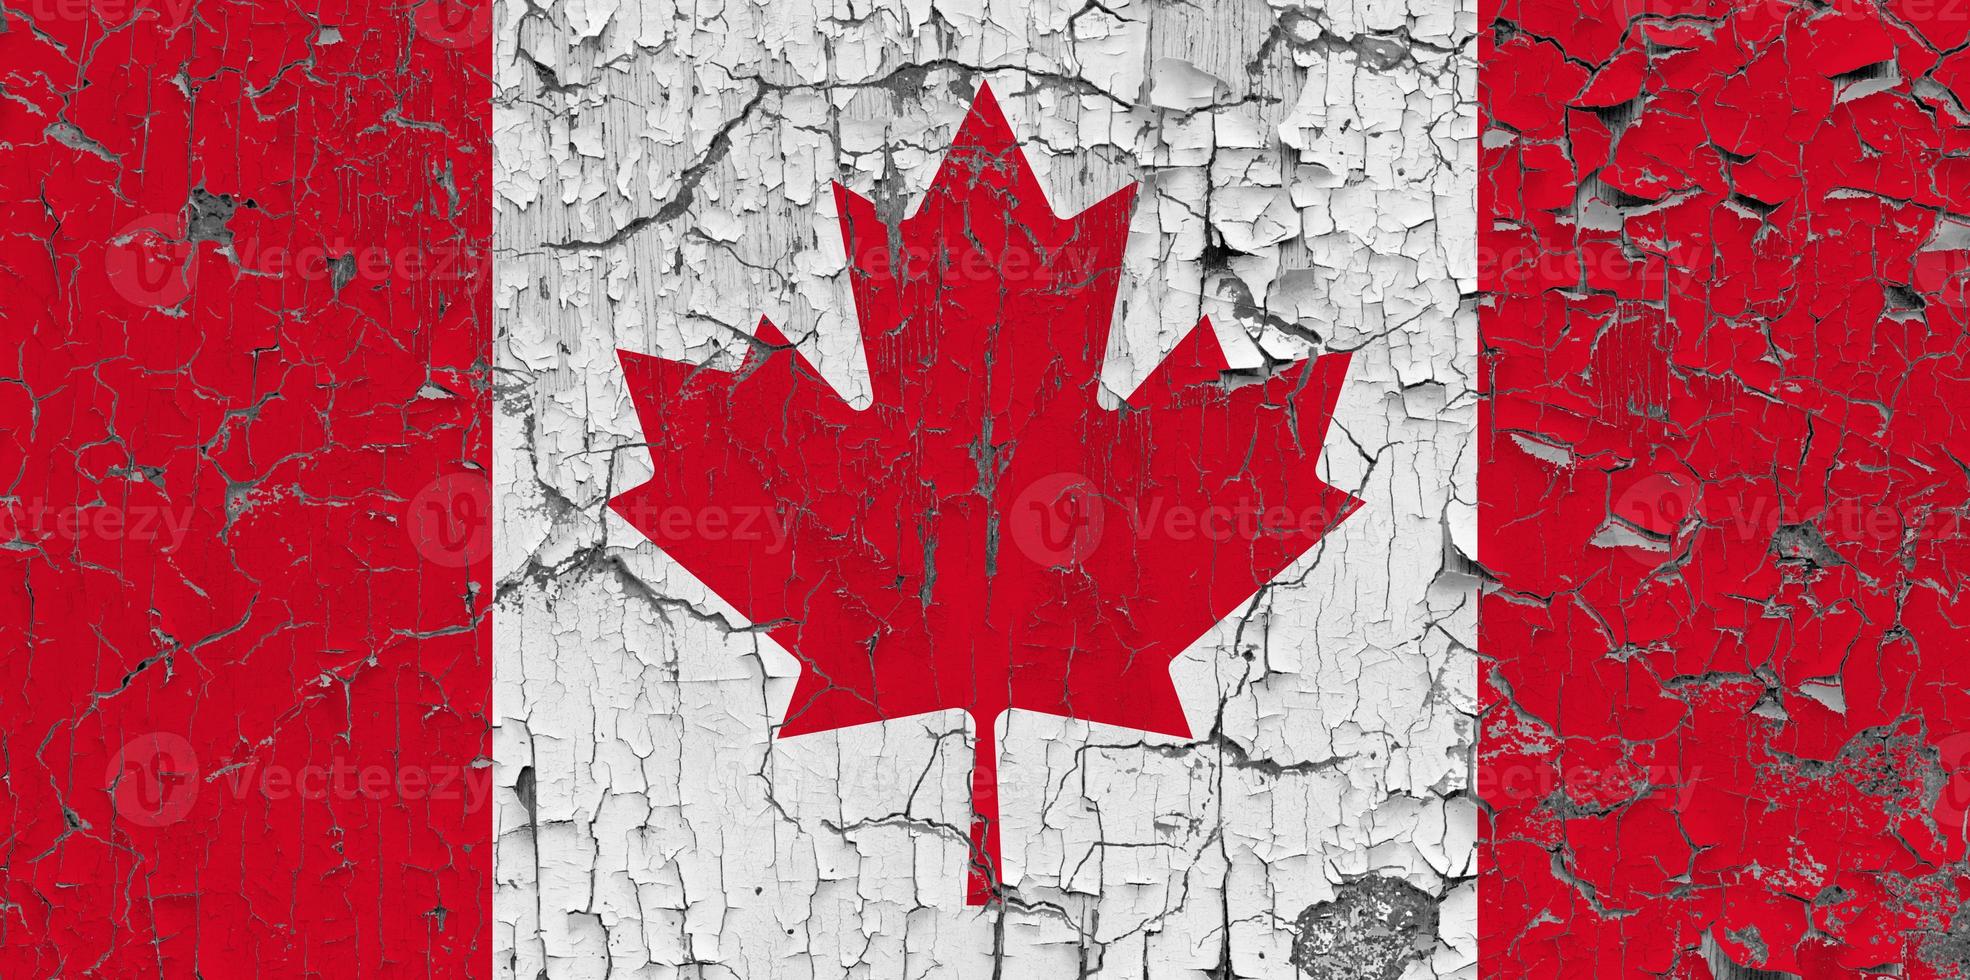 Distressed Canada Flag Stock Photos, Images and Backgrounds for Free ...